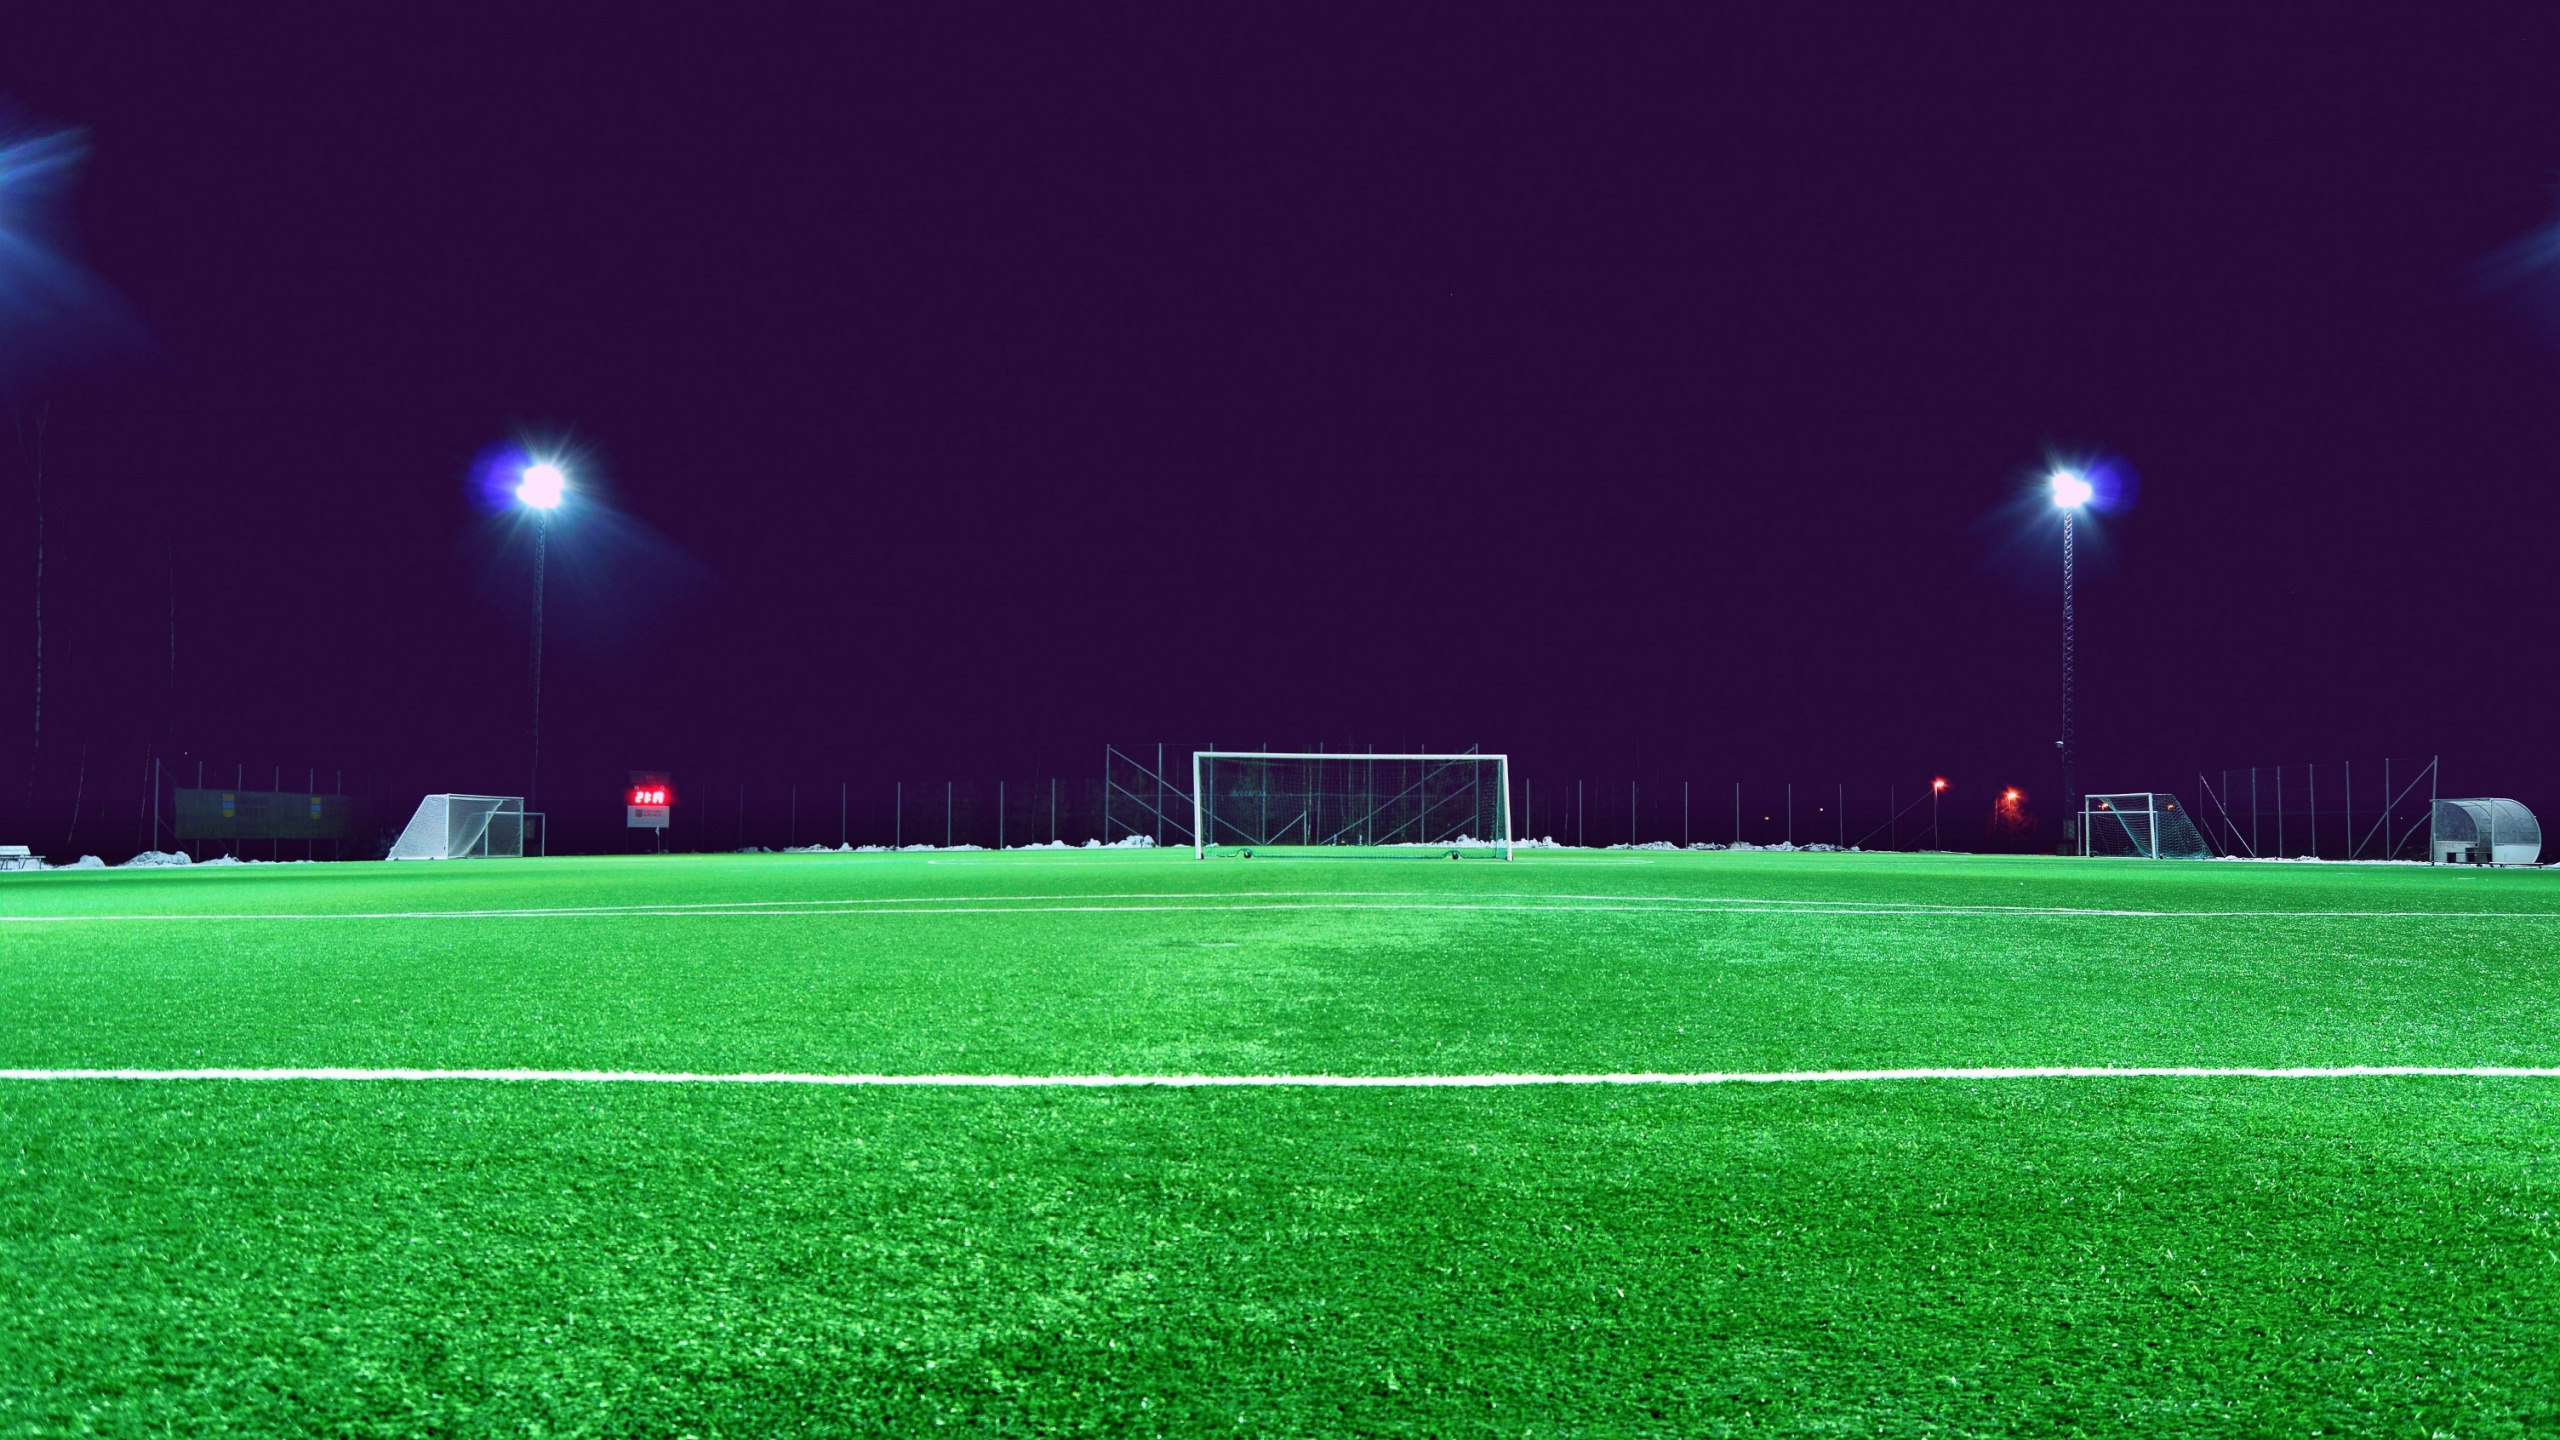 Soccer Goal Net on Green Field During Night Time. Wallpaper in 2560x1440 Resolution